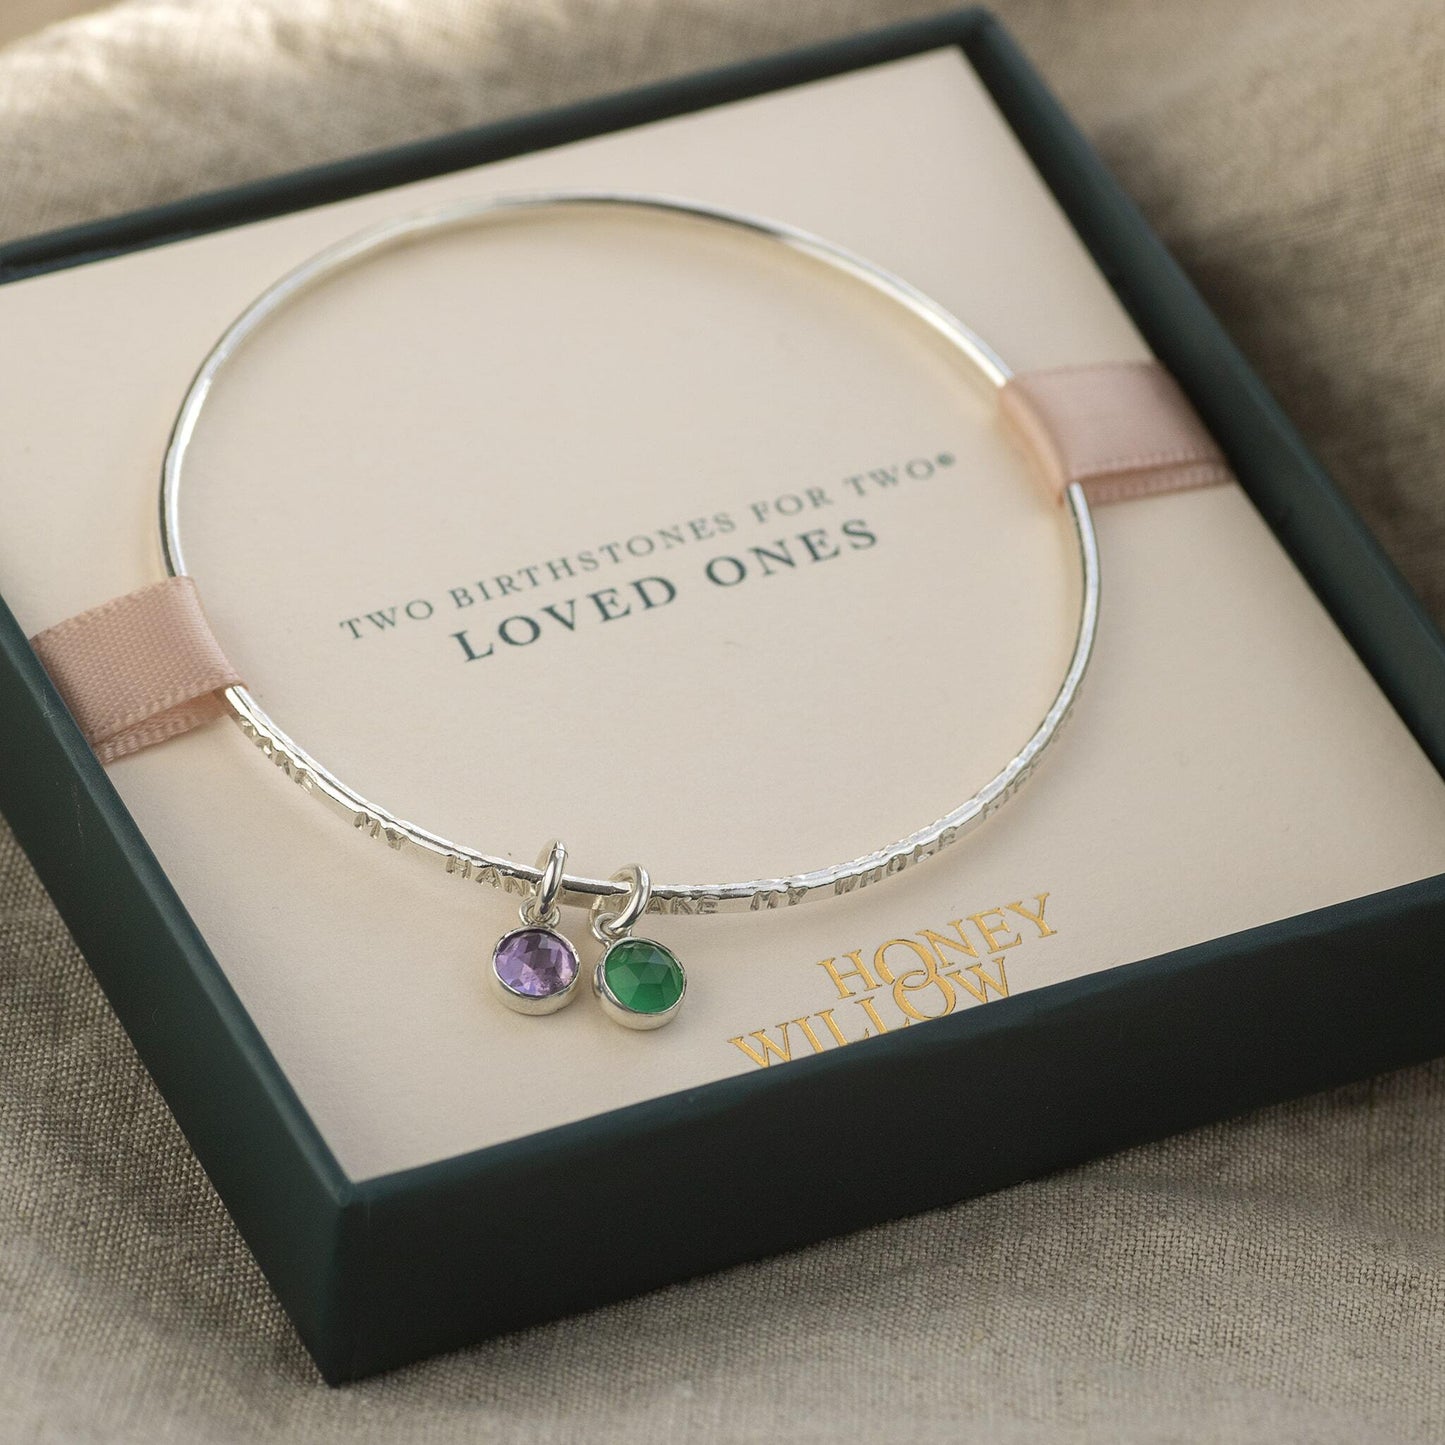 Personalised Bangle - Birthstones for Loved Ones - Hand Stamped Media 8 of 11